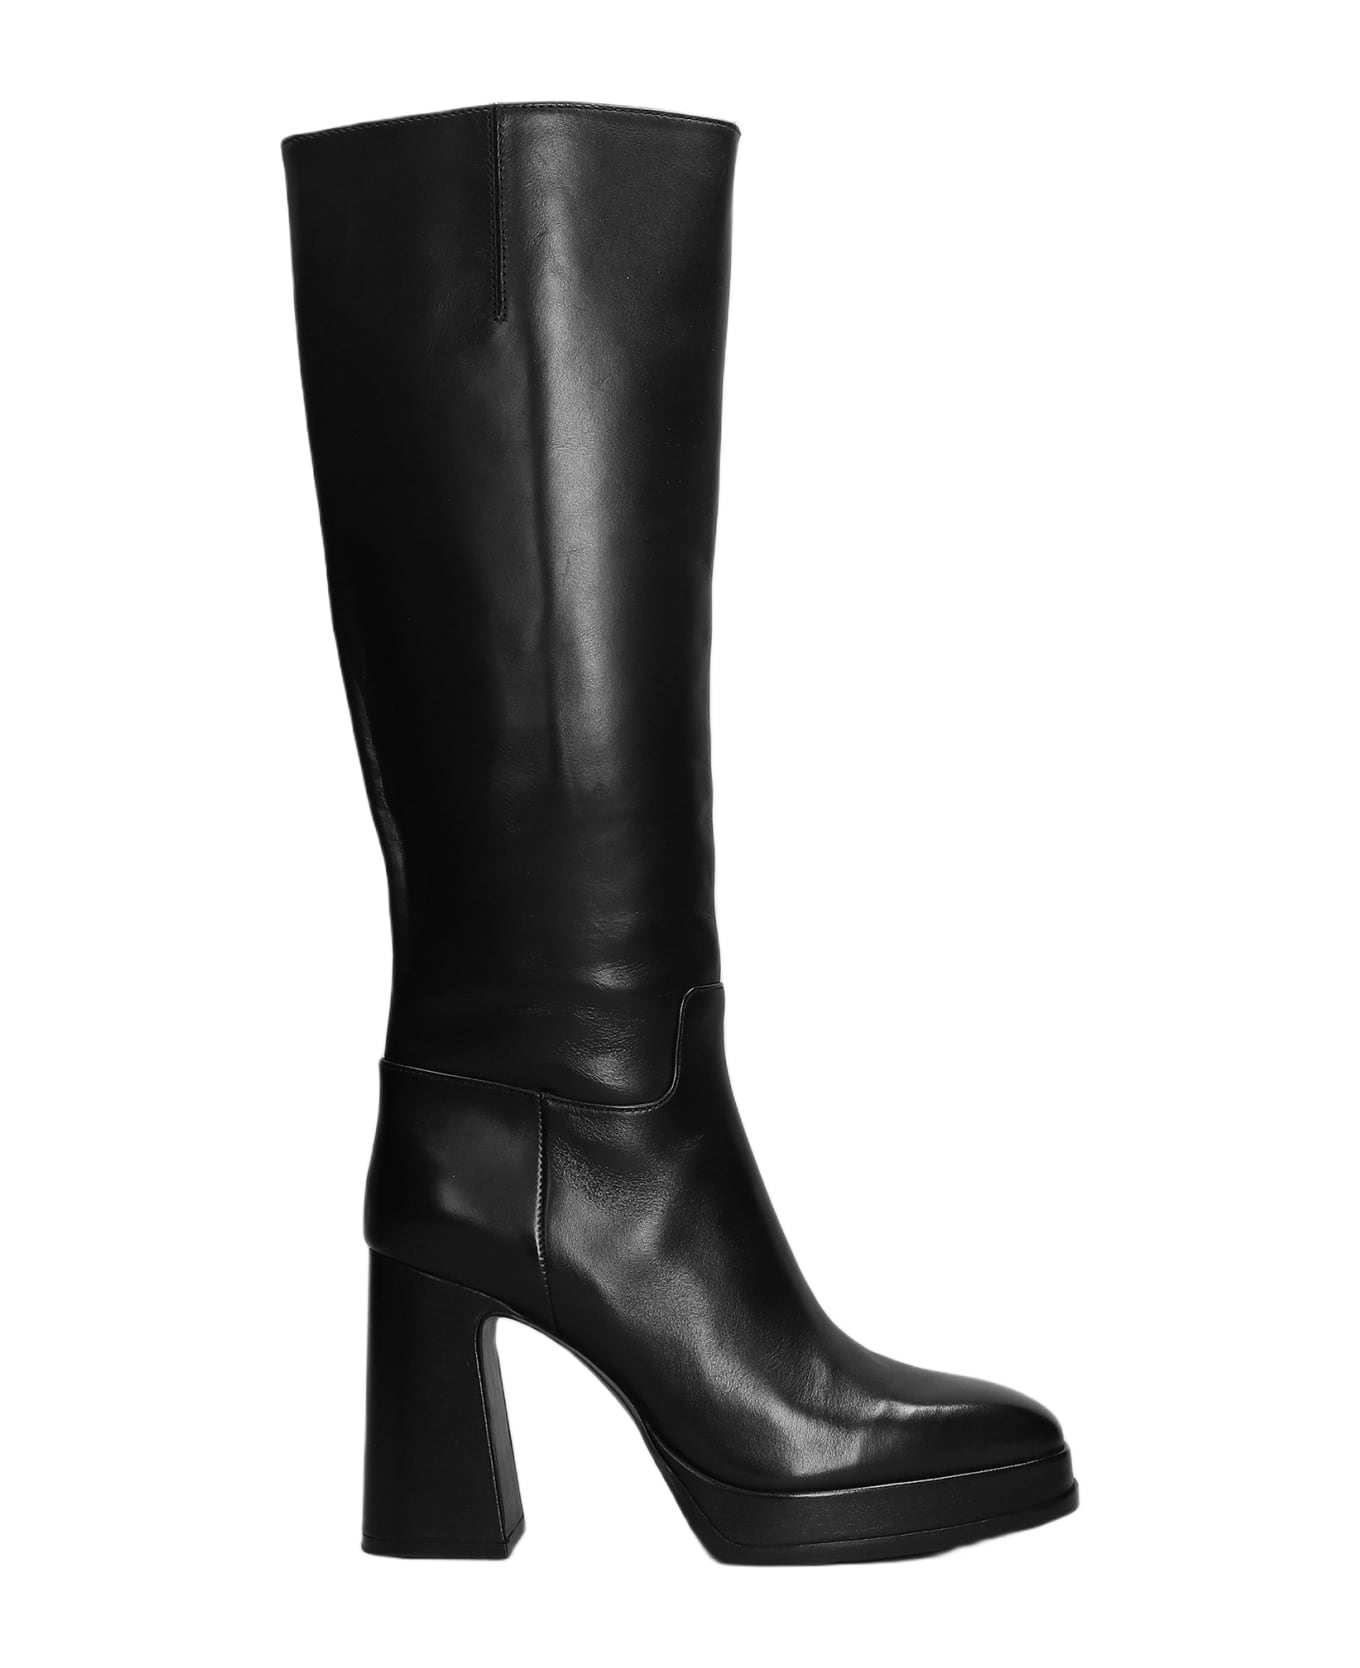 Ash Amy High Heels Boots In Black Leather - black